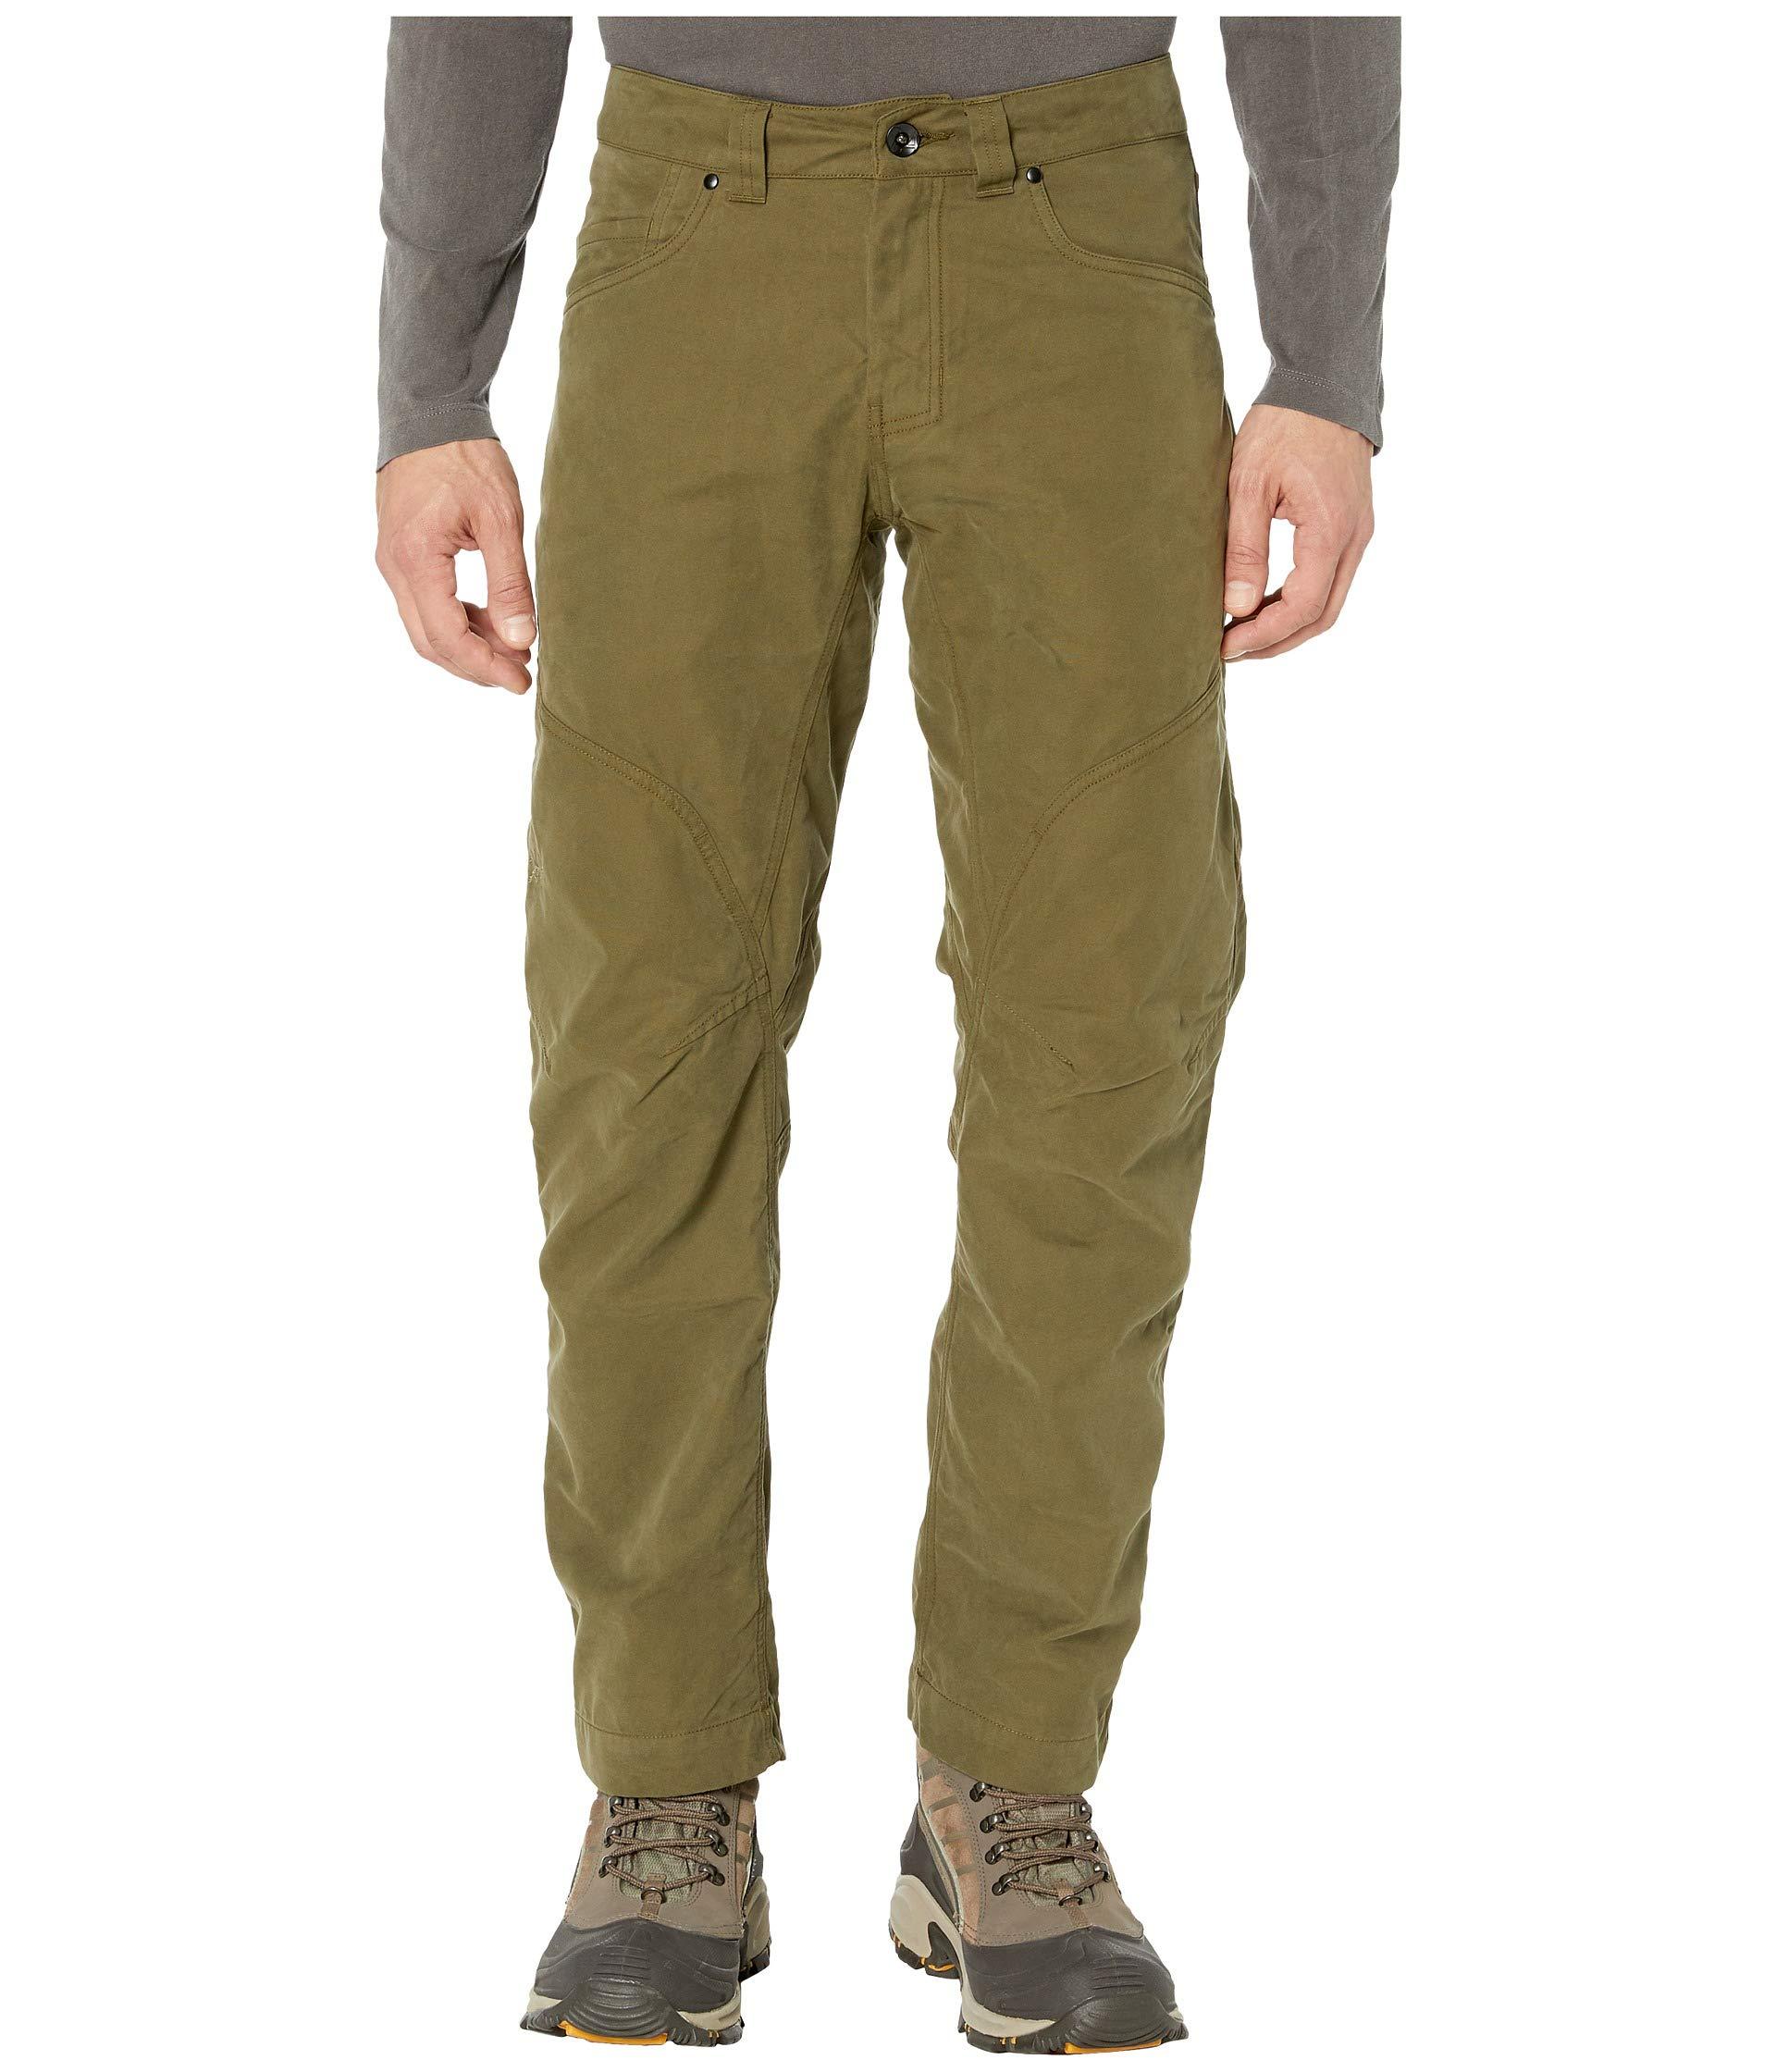 Arc'teryx Canvas Cronin Pants in Olive (Green) for Men - Lyst